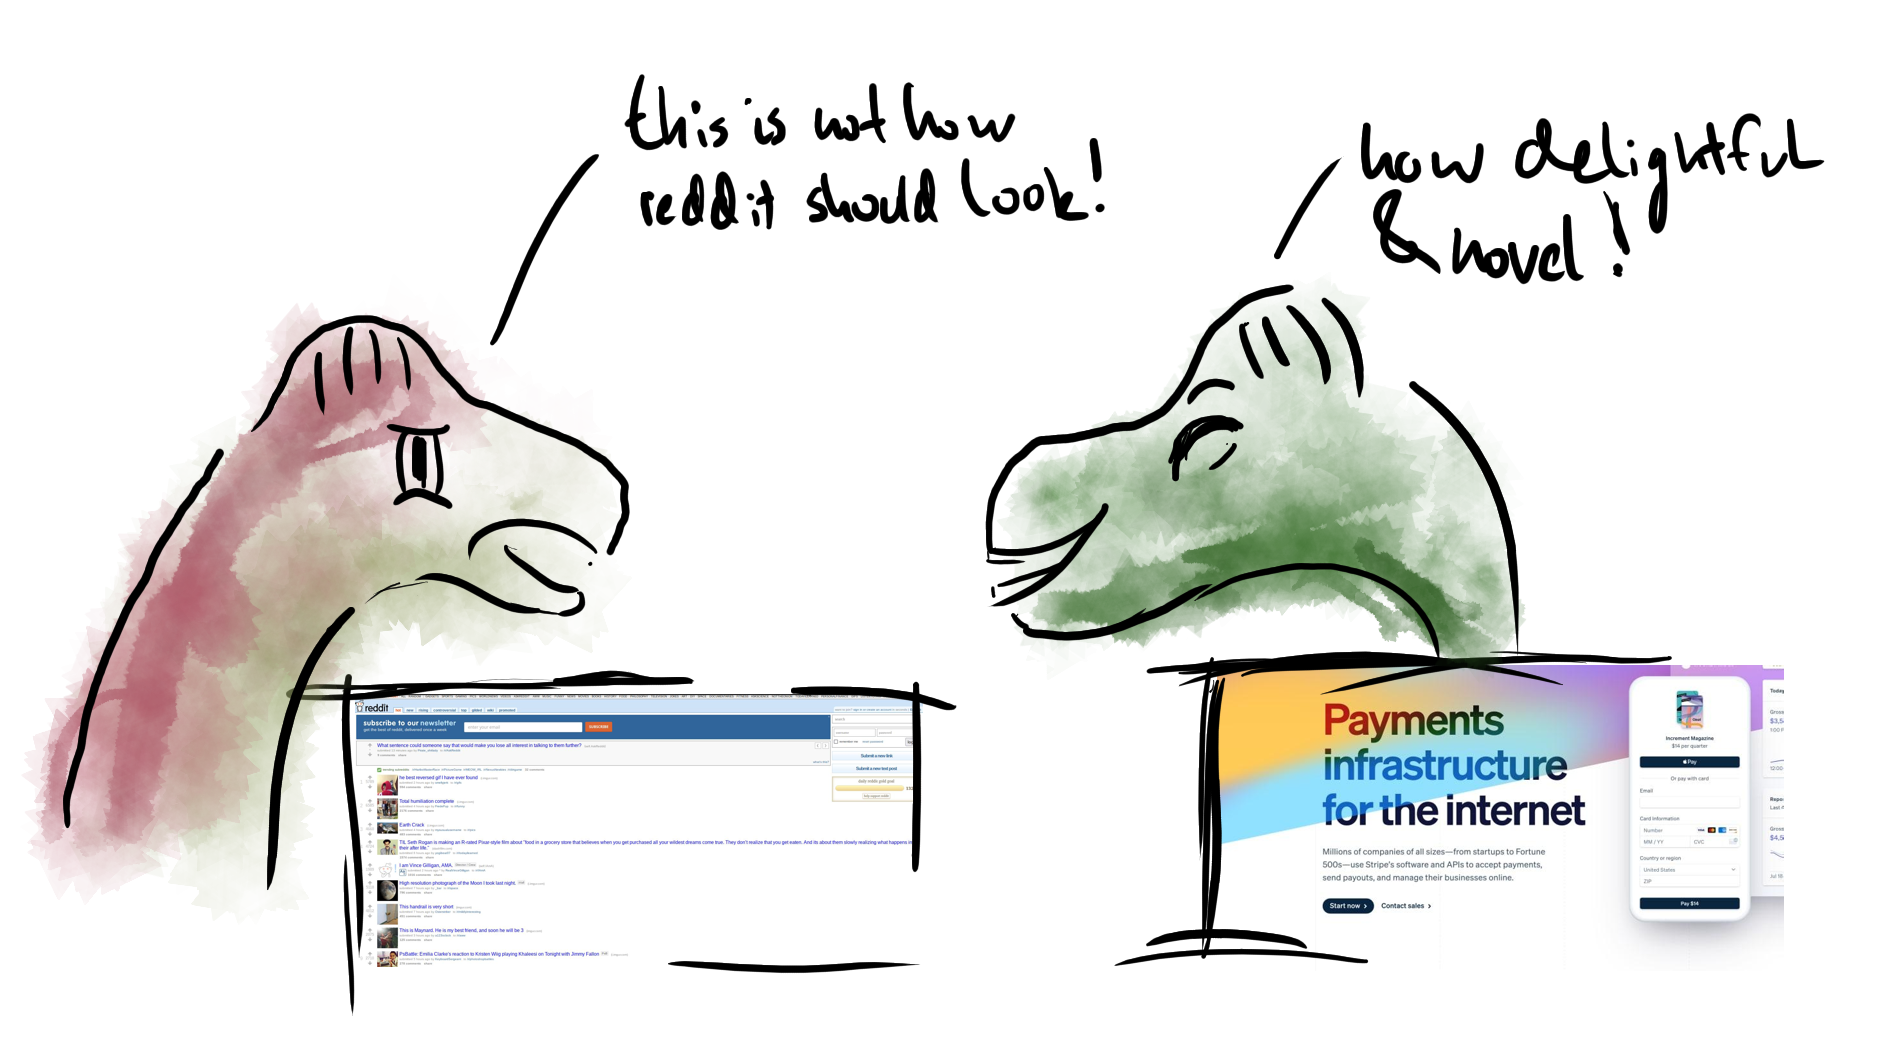 Two comic dinosaurs judging two unexpected web layouts: The 2014 Reddit redesign is hated, the classic Stripe landing page loved